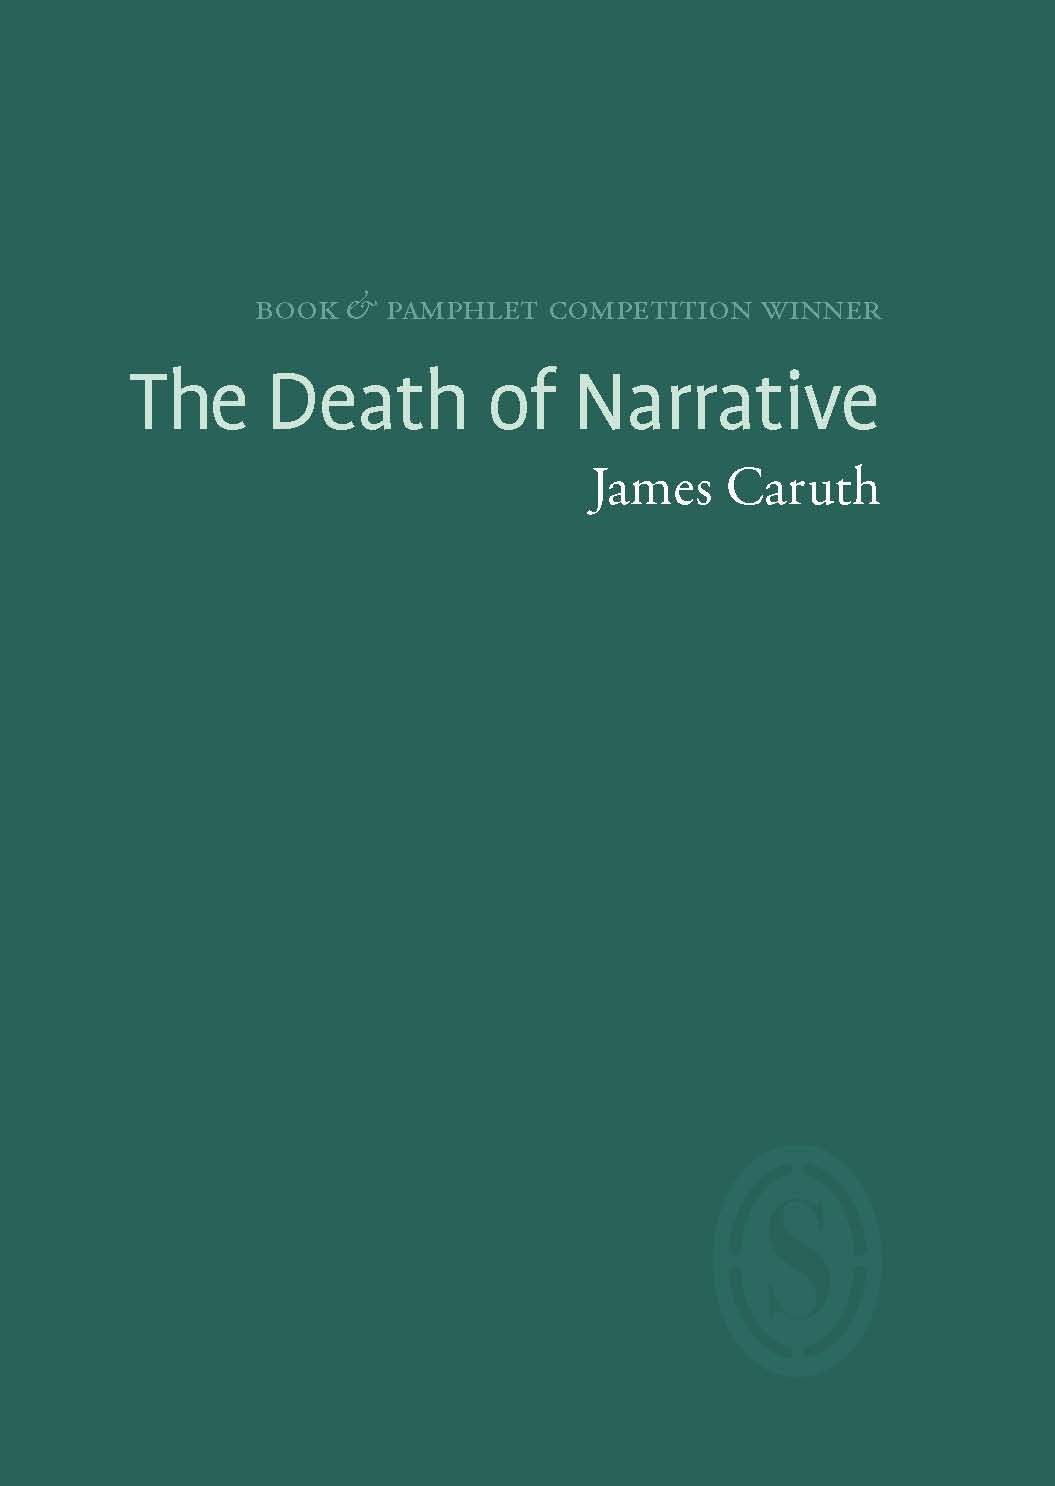 The Death of Narrative